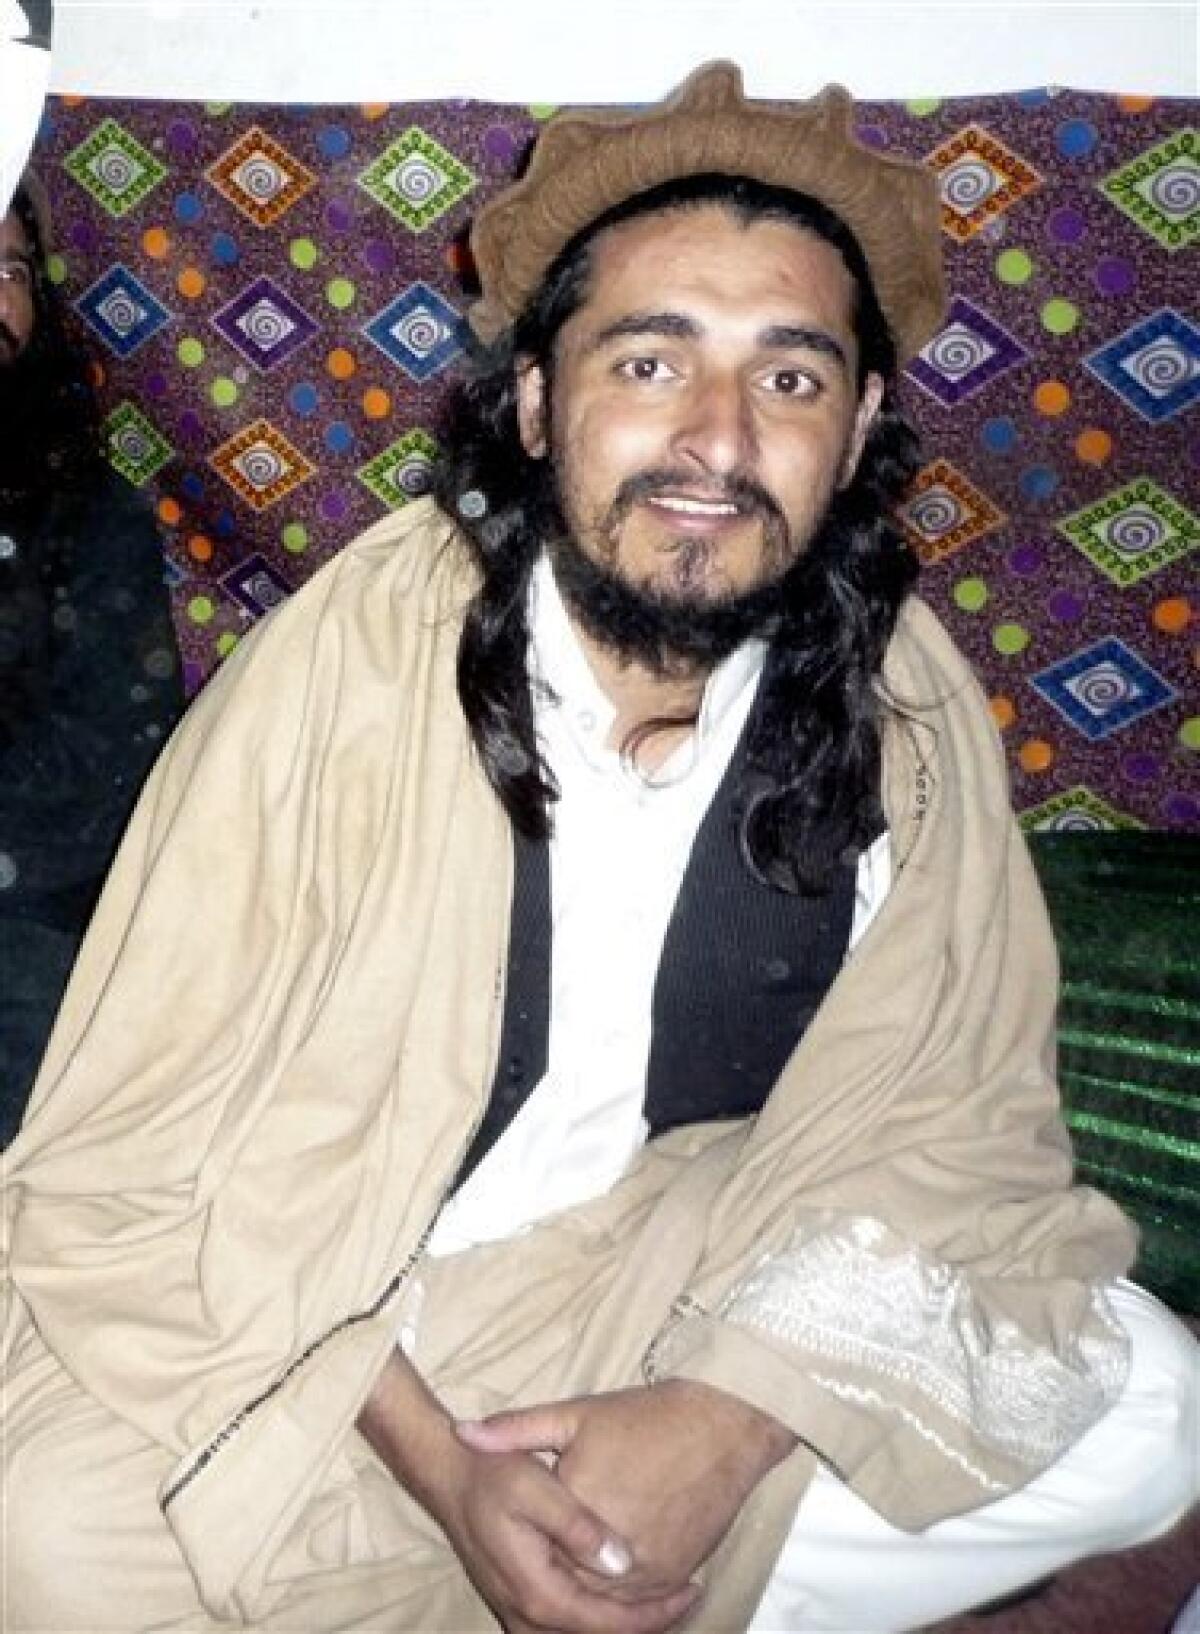 FILE - In this Nov. 26, 2008 file photo, Pakistani Taliban chief Hakimullah Mehsud sits in Orakzai tribal region of Pakistan. The Pakistani Taliban promise future attacks on major U.S. cities and appear to claim responsibility for an attempted car bombing in New York in three separate videos that surfaced after the weekend scare, monitoring groups said Monday, May 3, 2010. U.S. authorities have played down the potential connection between the Pakistani militant network and the car bomb attempt in New York's Times Square, saying the group does not have the global infrastructure to carry out such a strike. (AP Photo/Ishtiaq Mehsud, File)